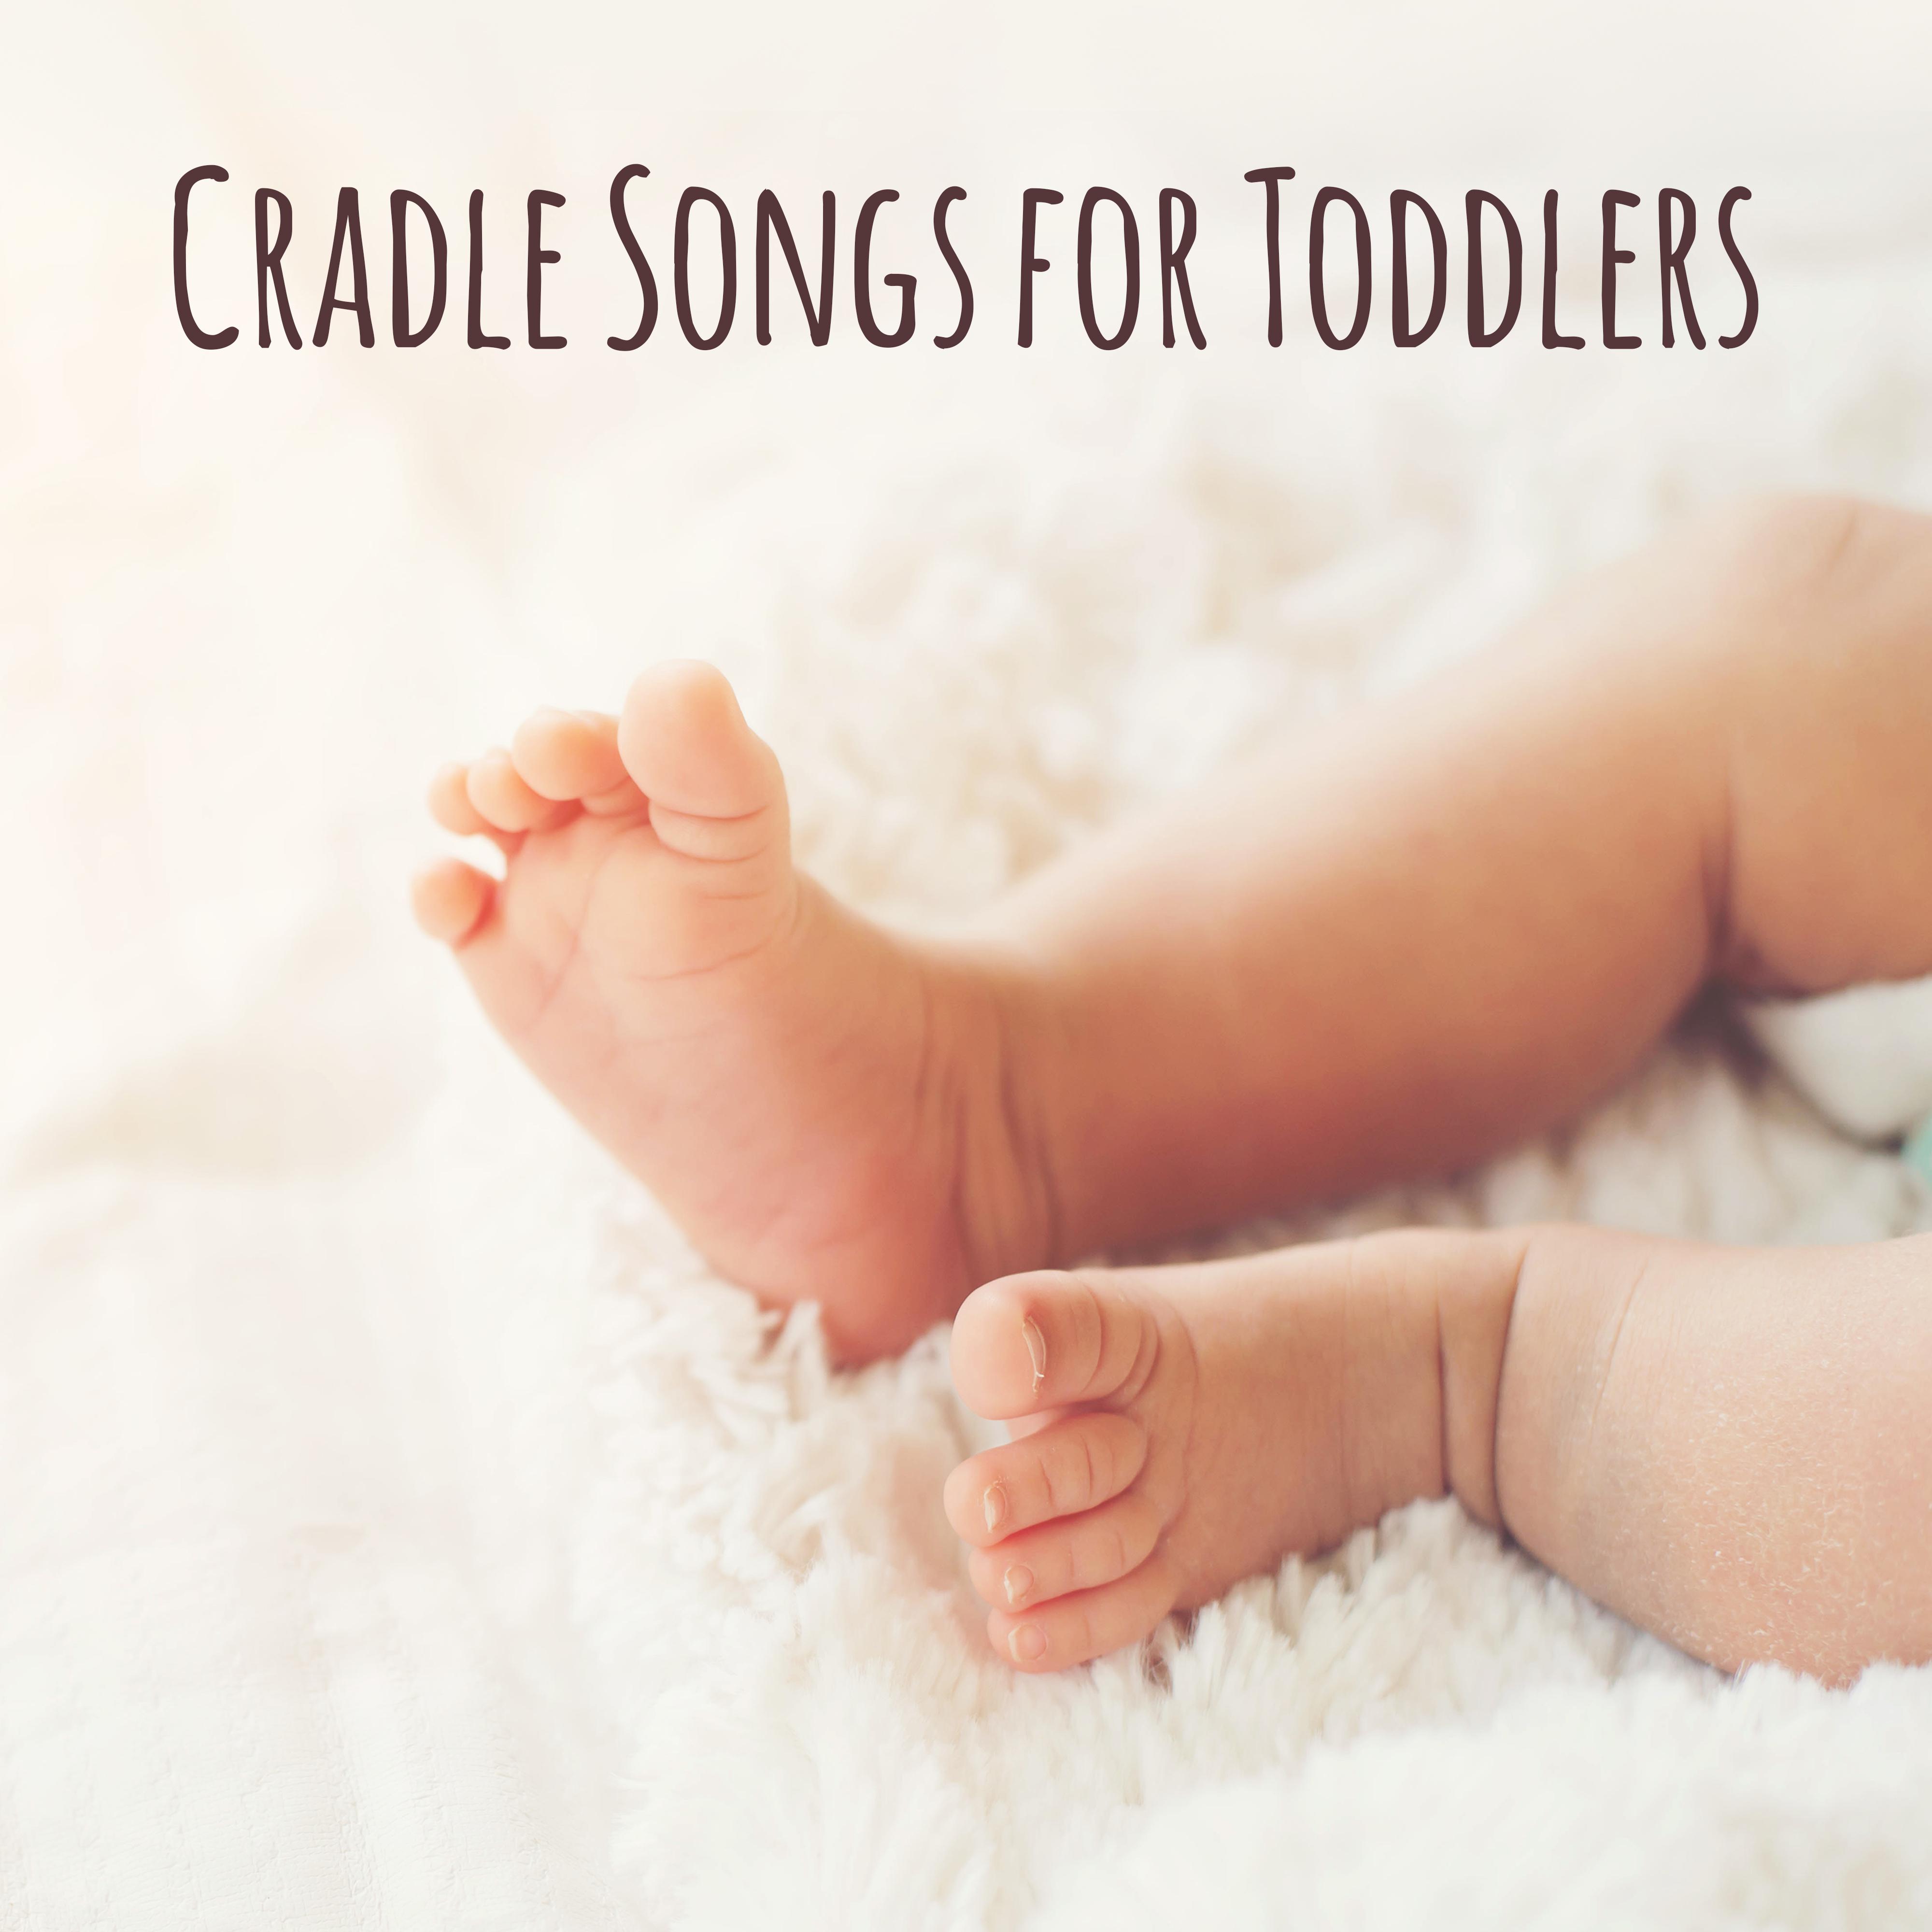 Cradle Songs for Toddlers